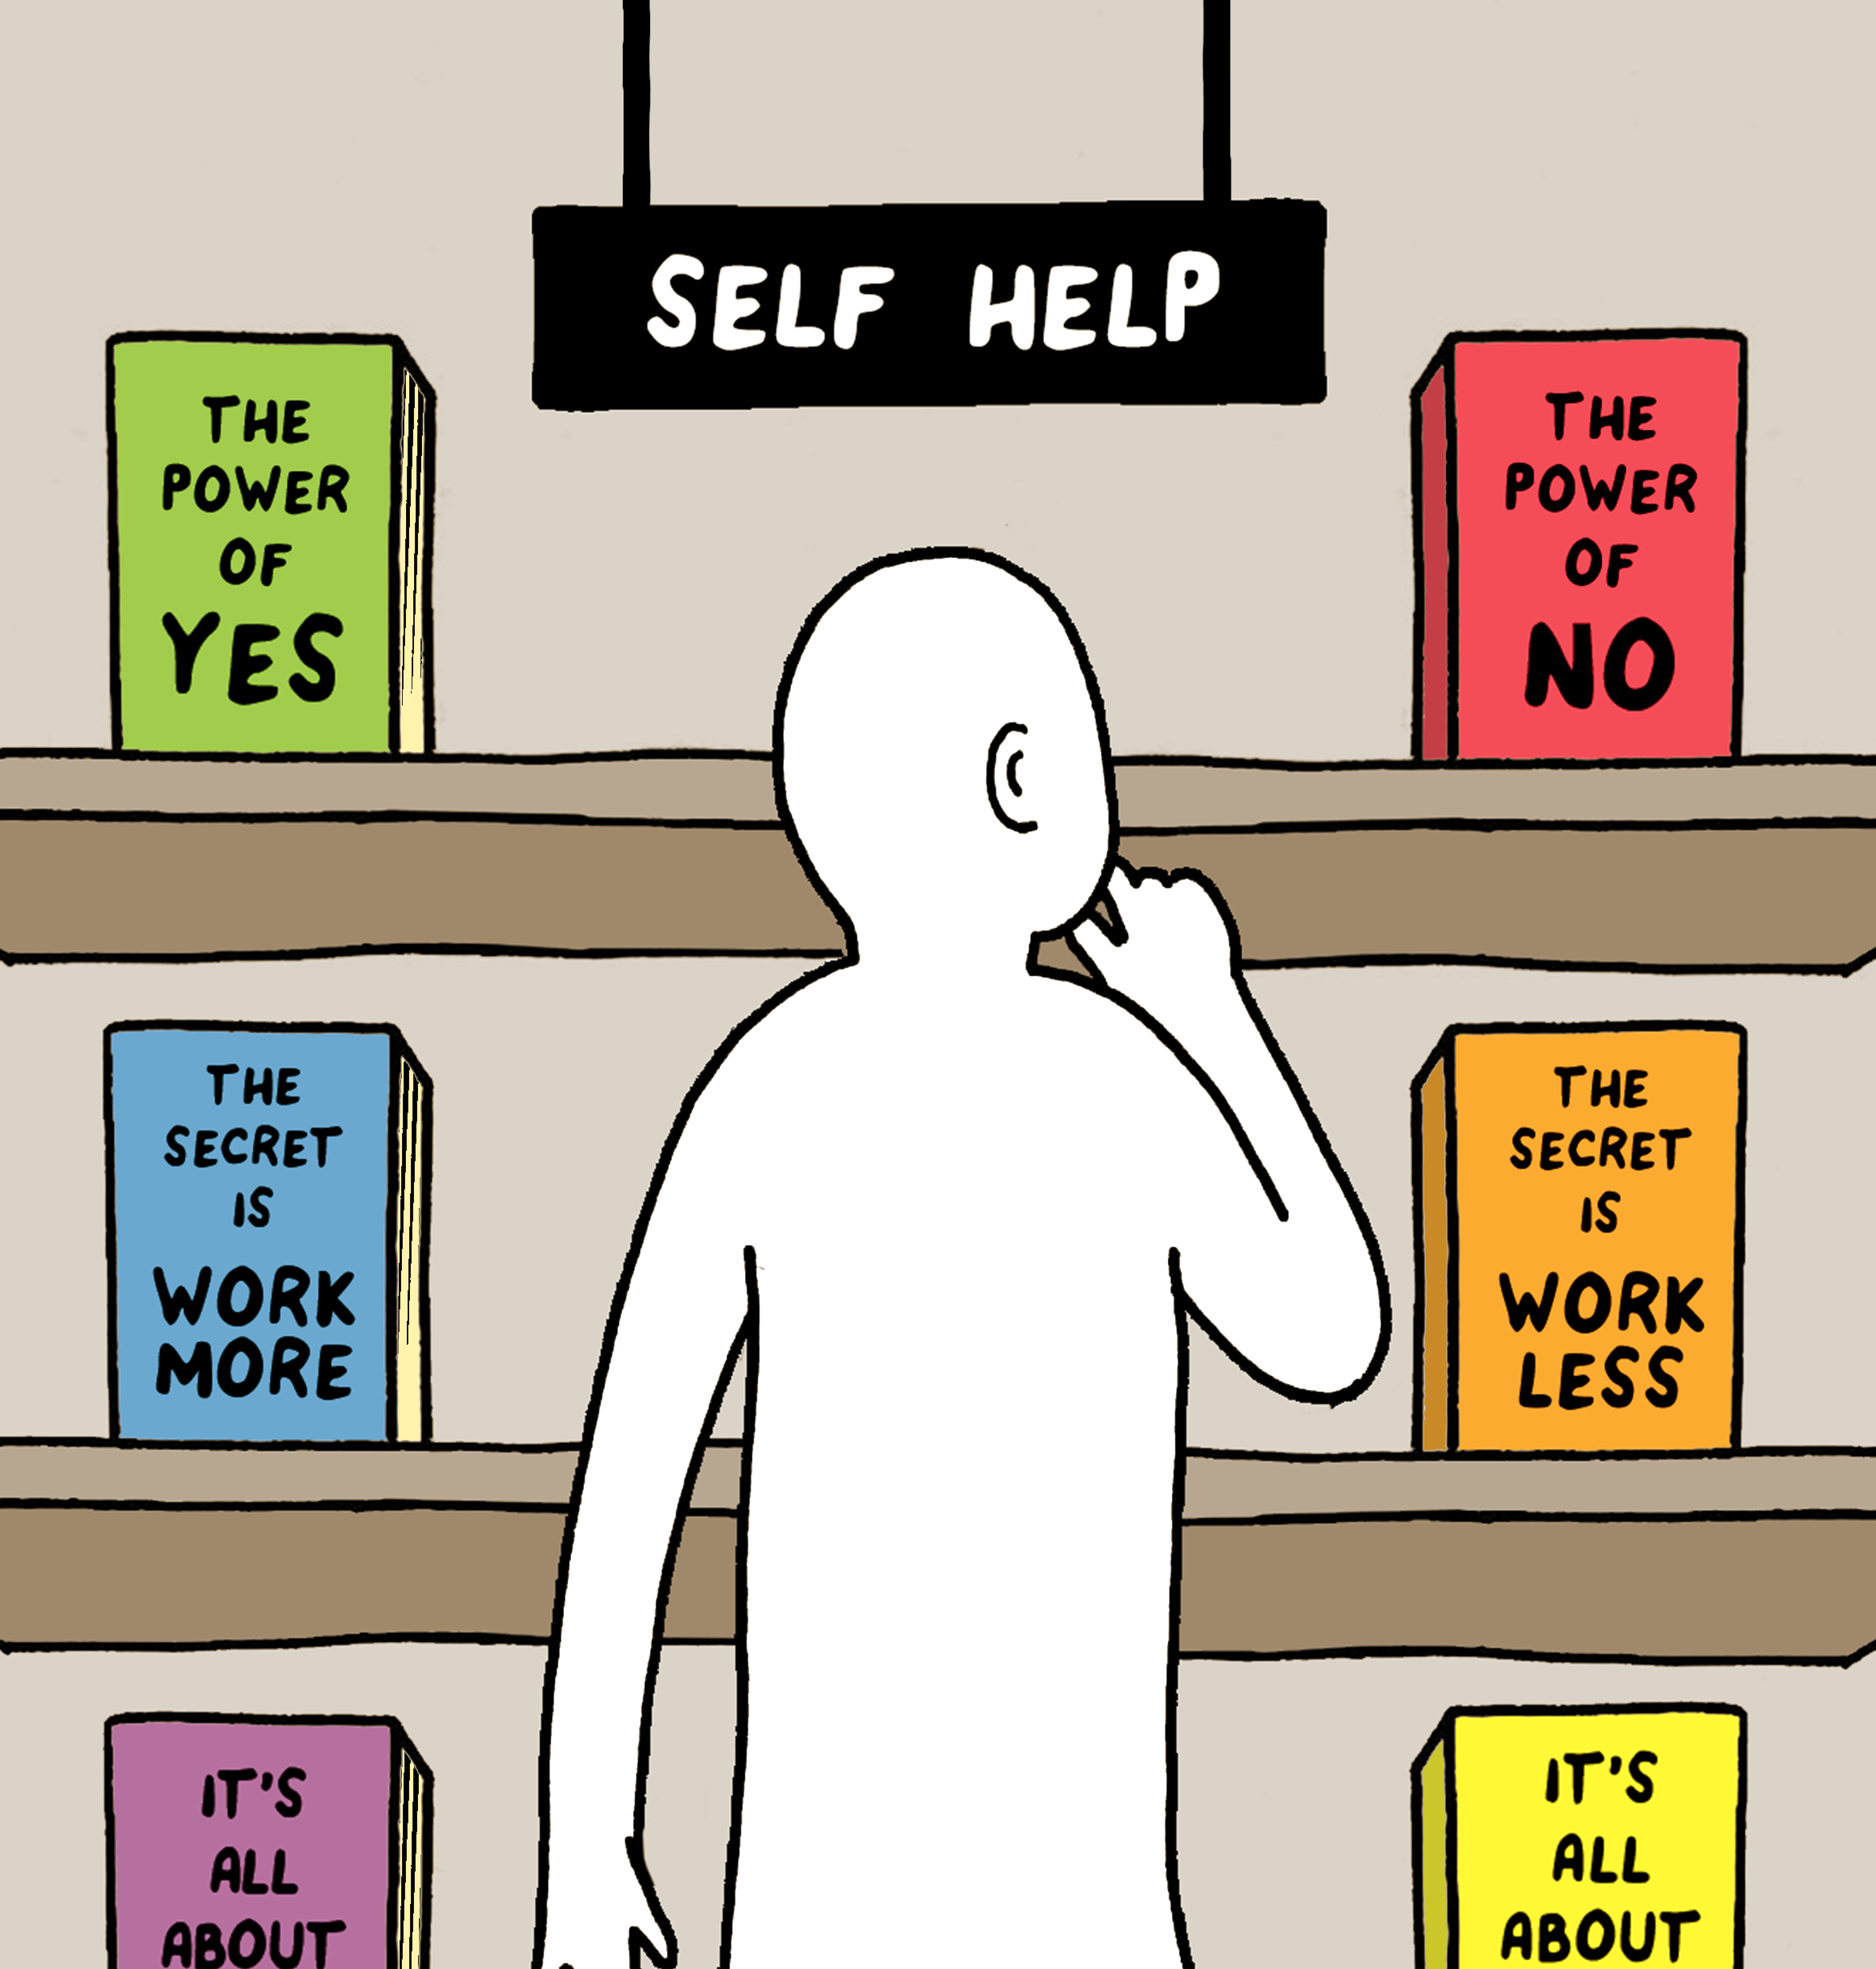 Self help book recommendations